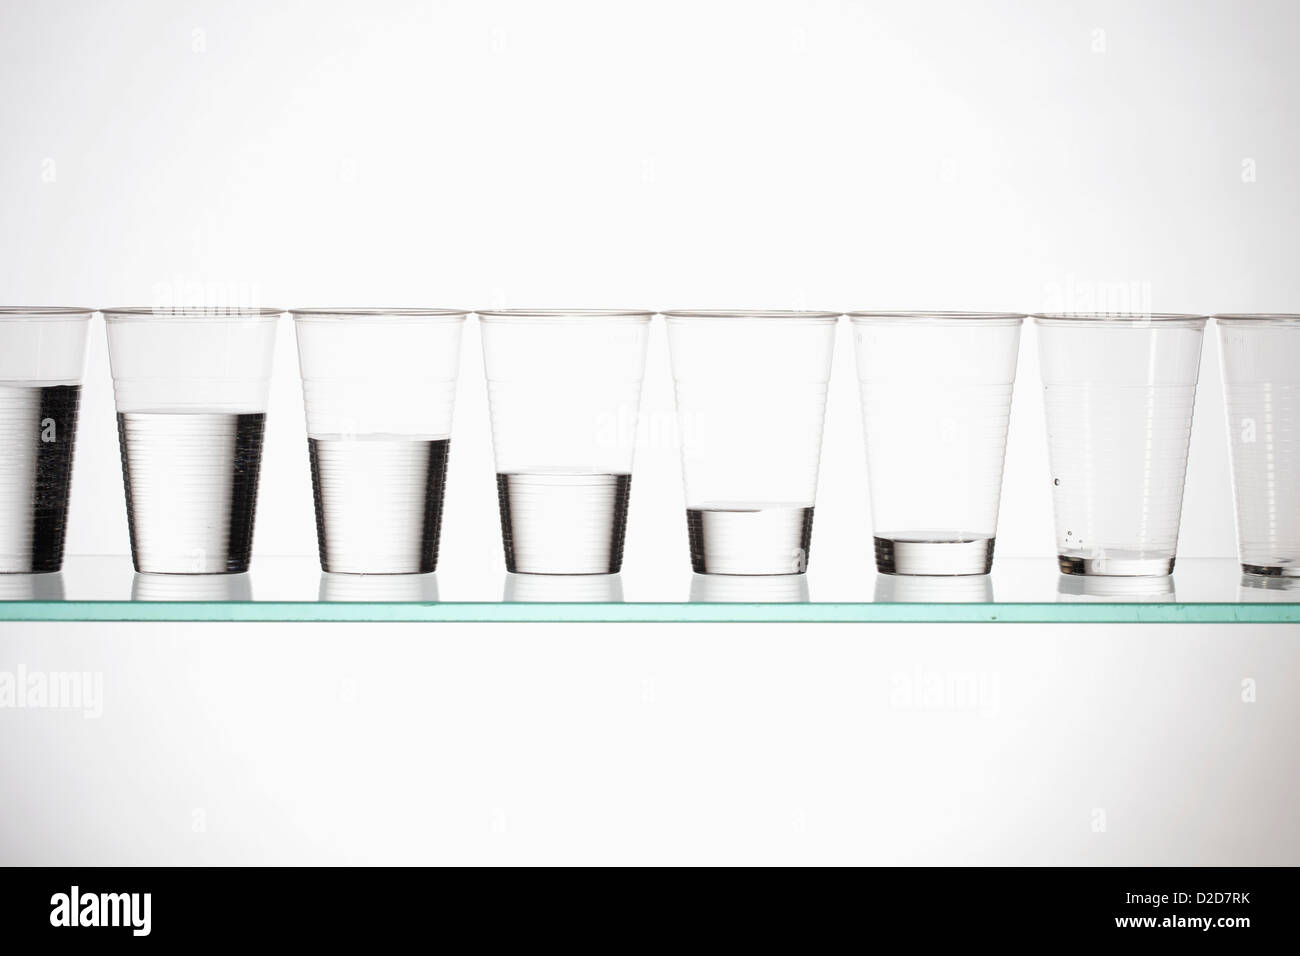 A row of glasses with varying amounts of water descending from full to empty Stock Photo